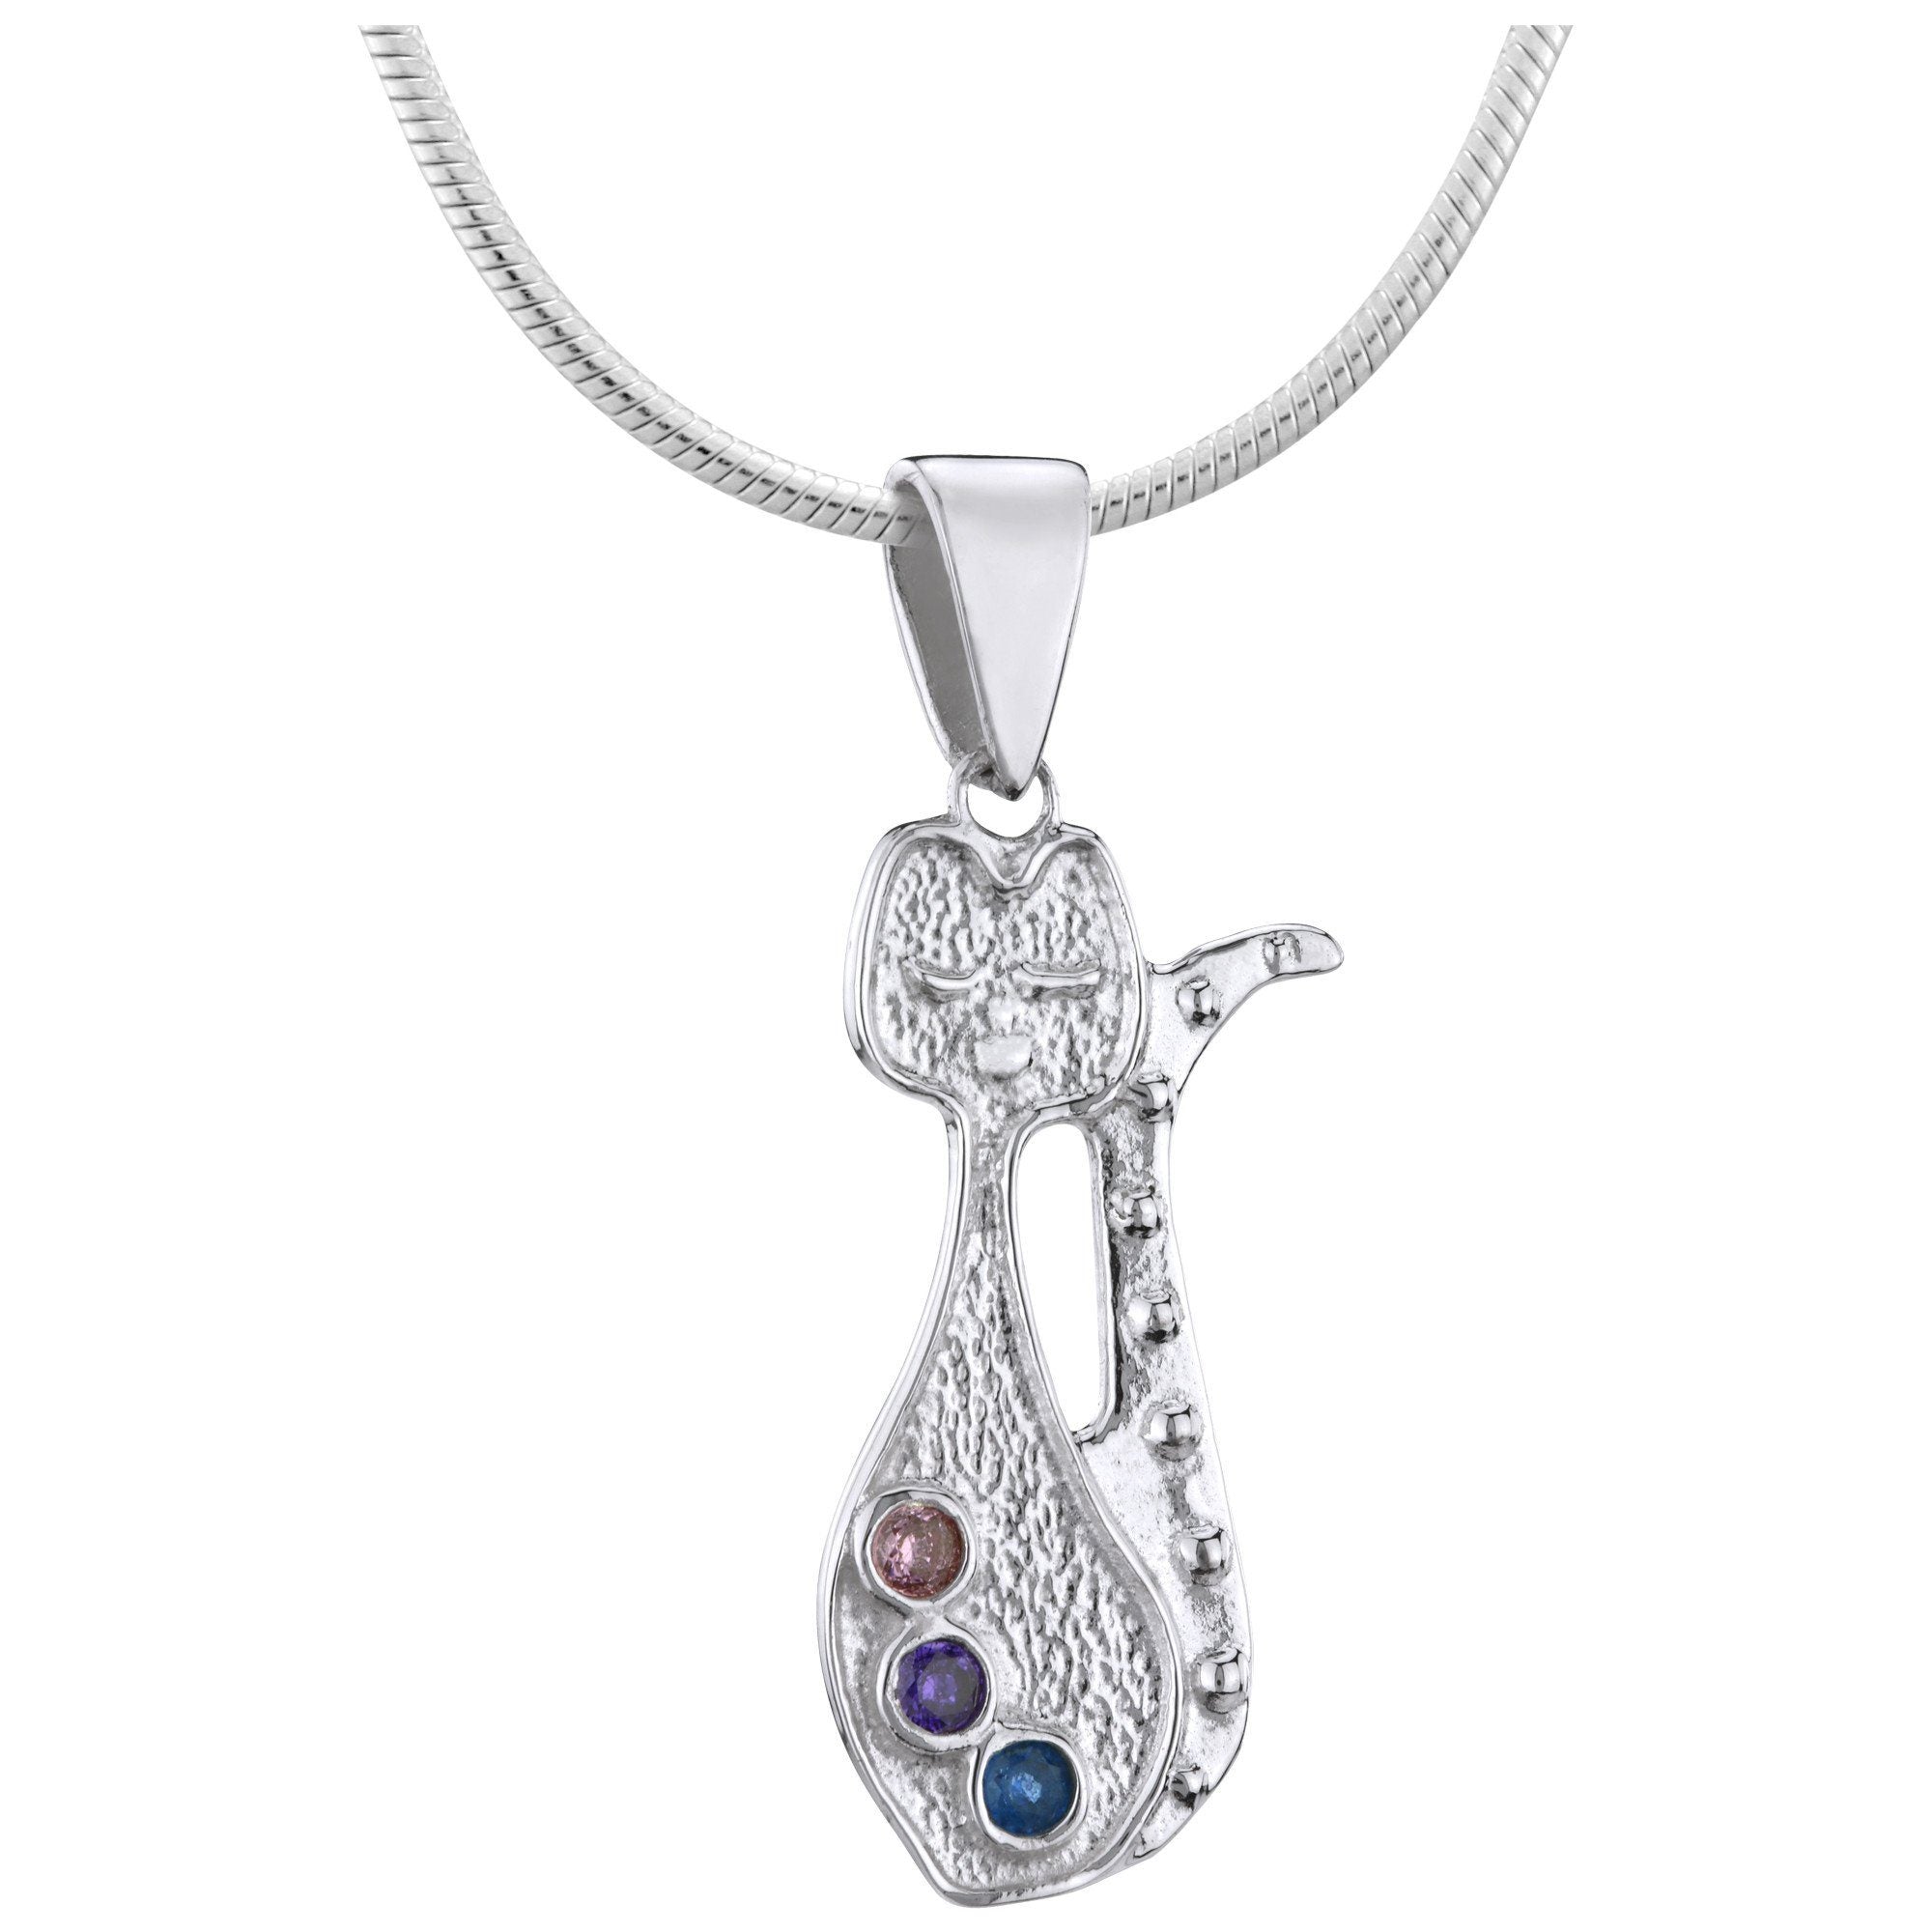 Fancy Cat Sterling Necklace - With Sterling Cable Chain